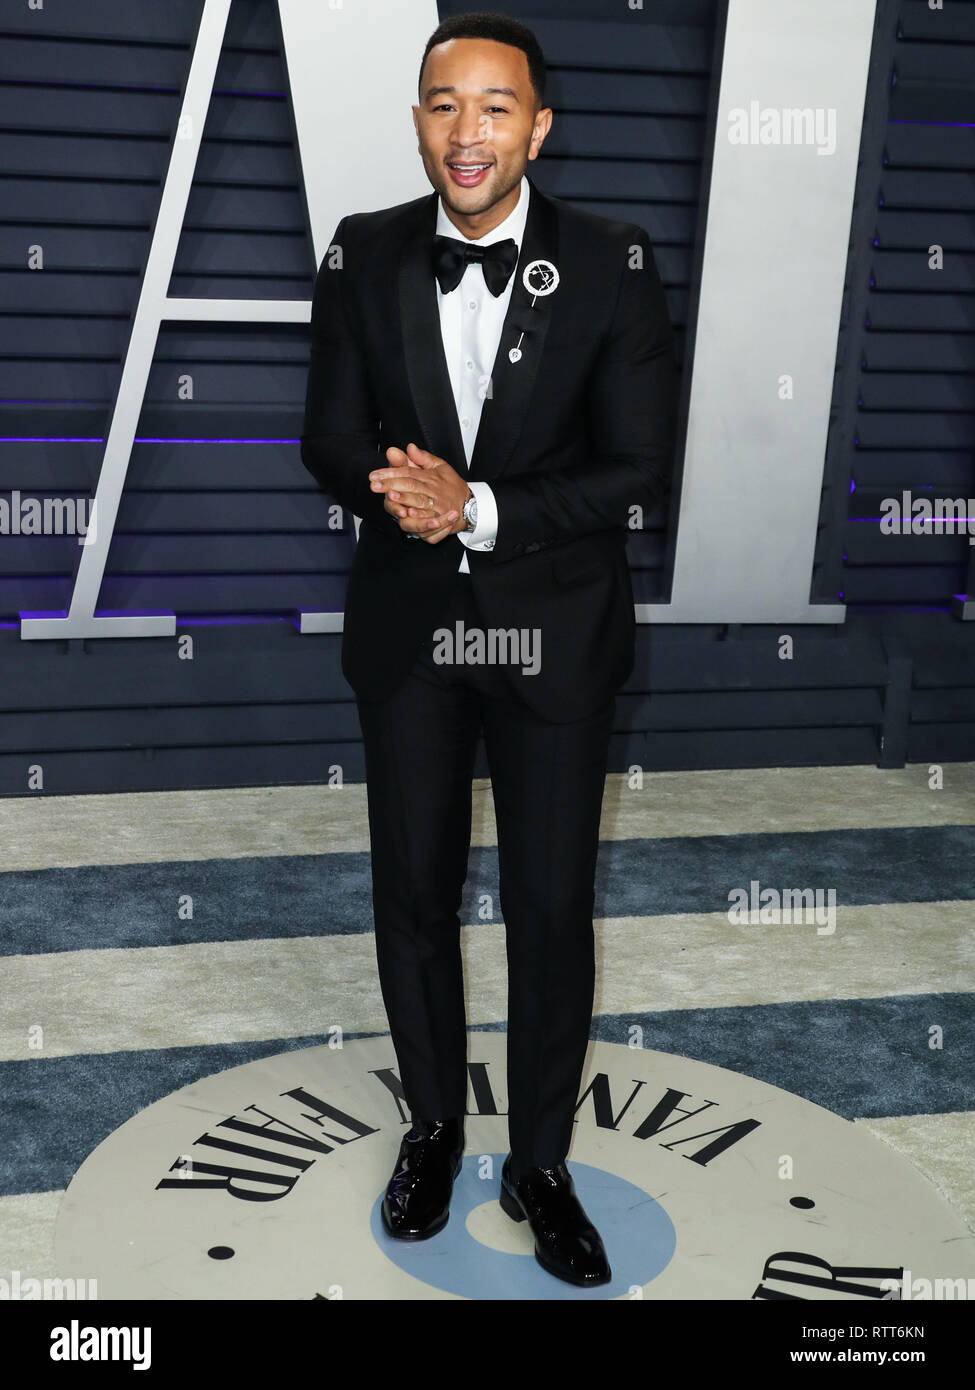 BEVERLY HILLS, LOS ANGELES, CA, USA - FEBRUARY 24: Singer John Legend wearing Gucci tux, Christian Louboutin shoes, and Dennis Tsuii pin arrives at the 2019 Vanity Fair Oscar